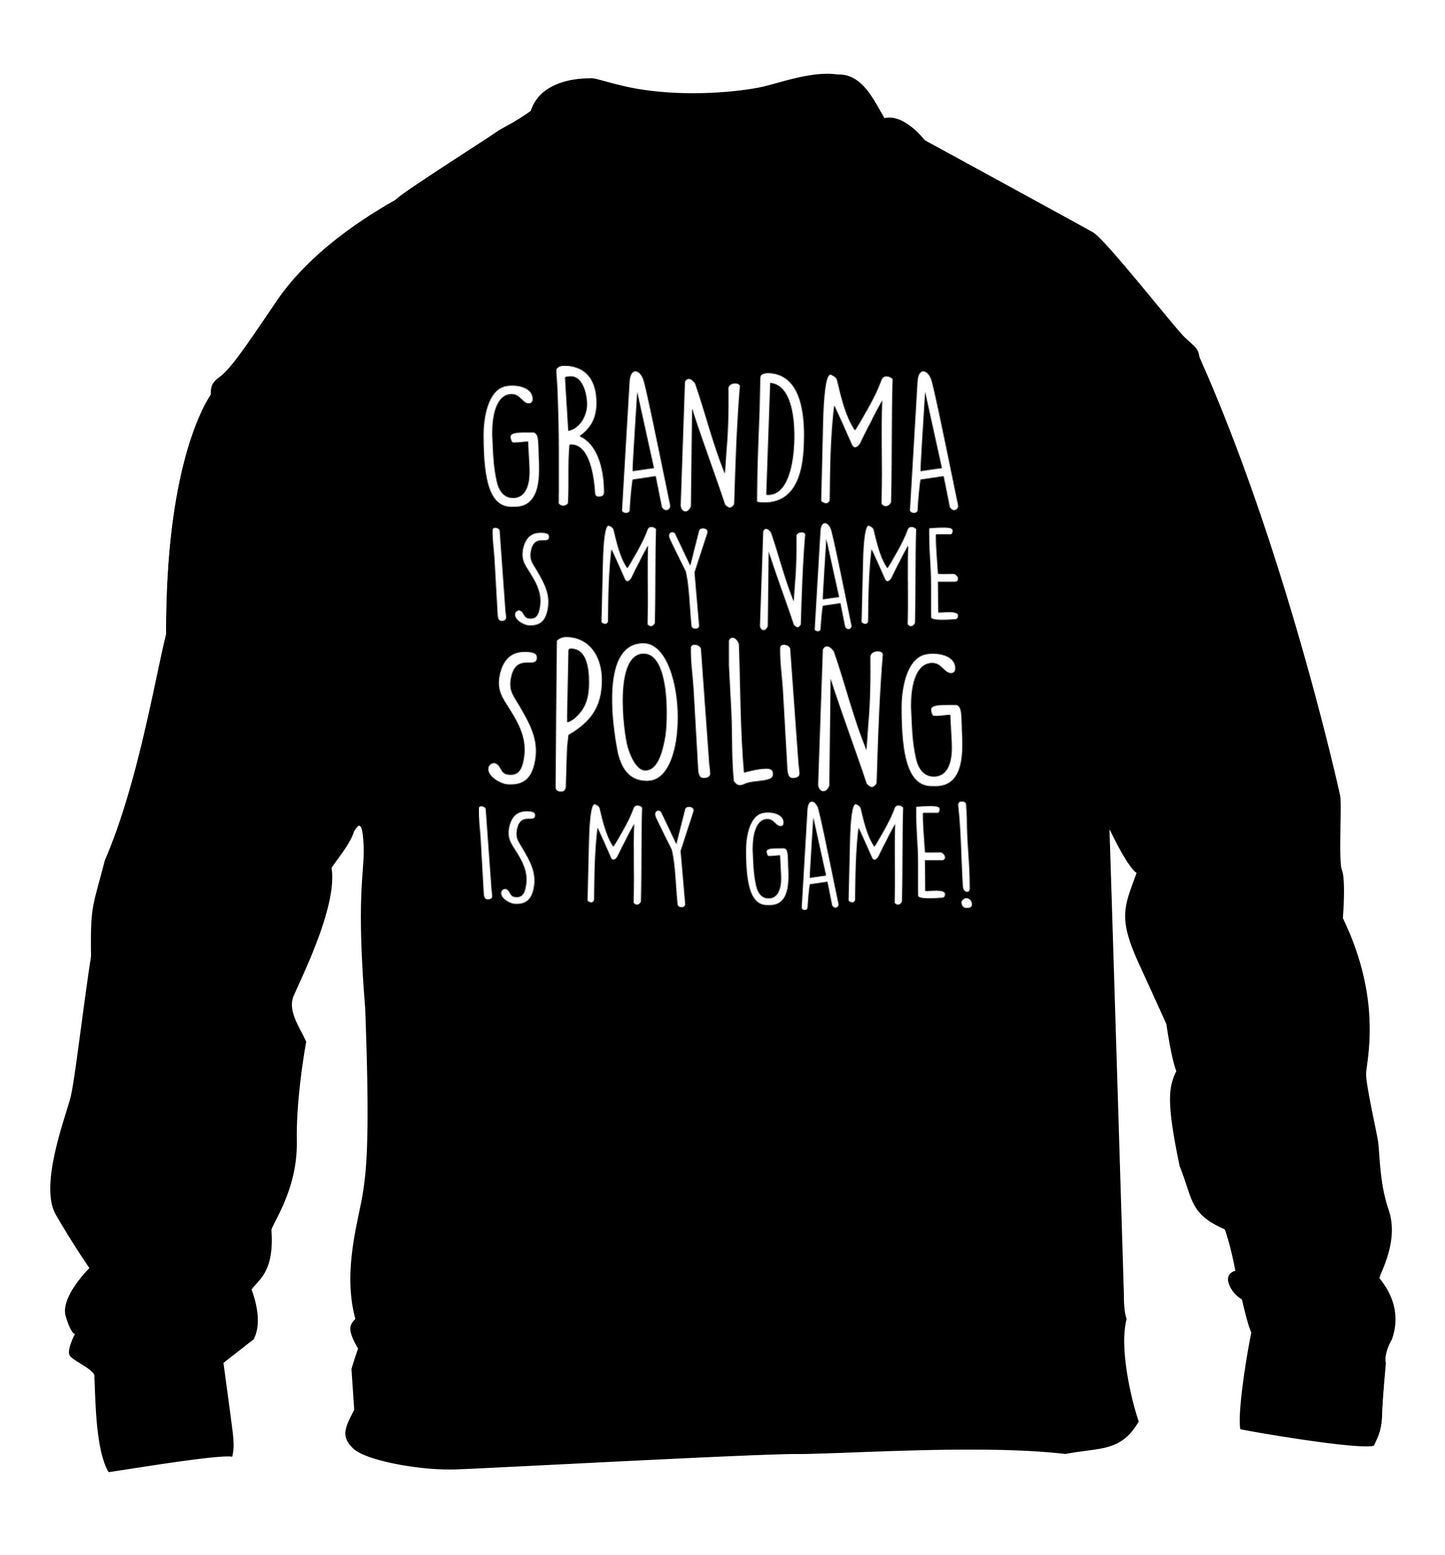 Grandma is my name, spoiling is my game children's black sweater 12-14 Years